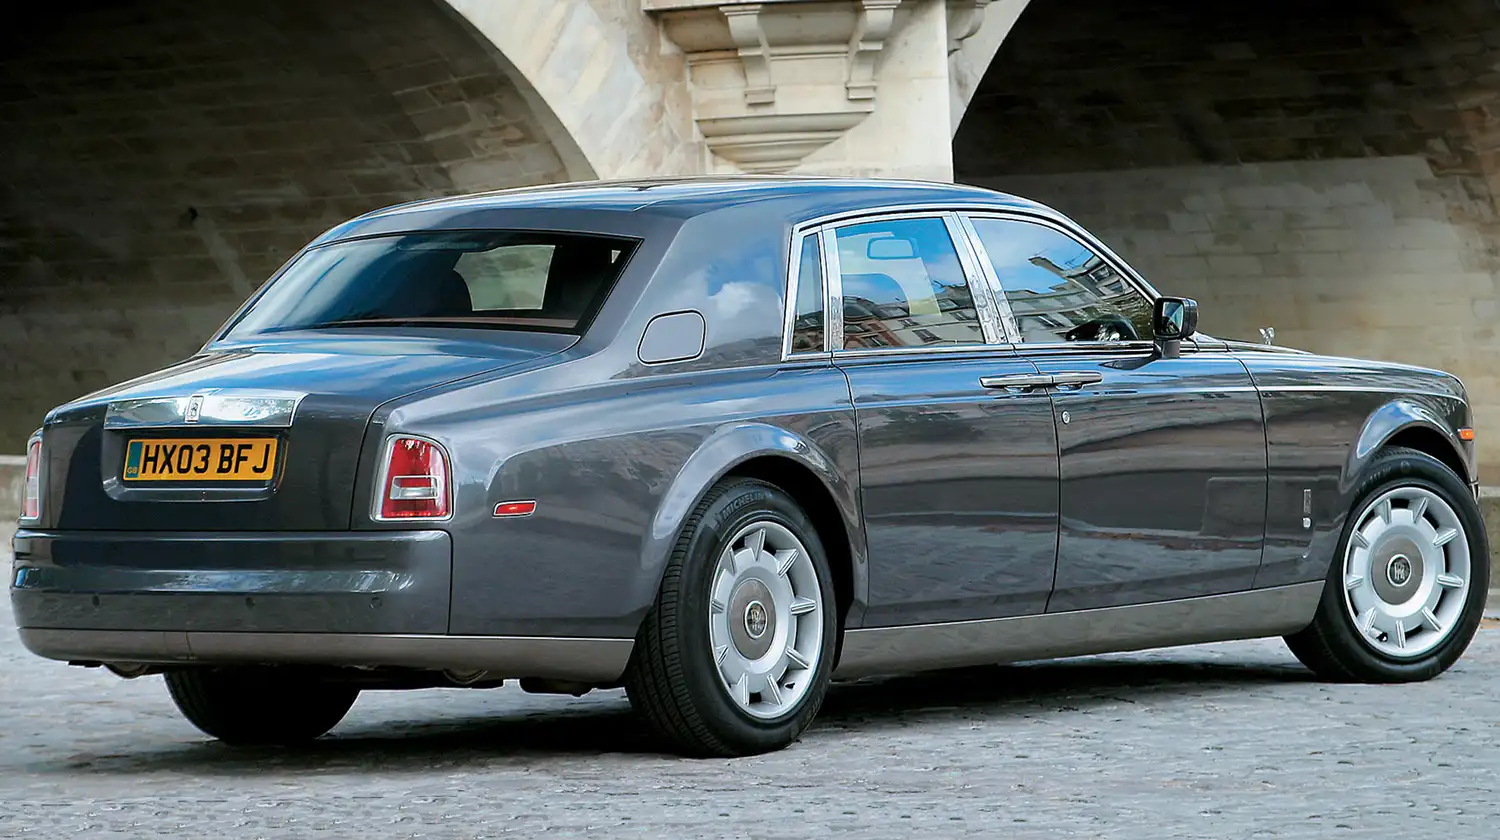 Rolls-Royce Phantom Extended dimensions, boot space and similars